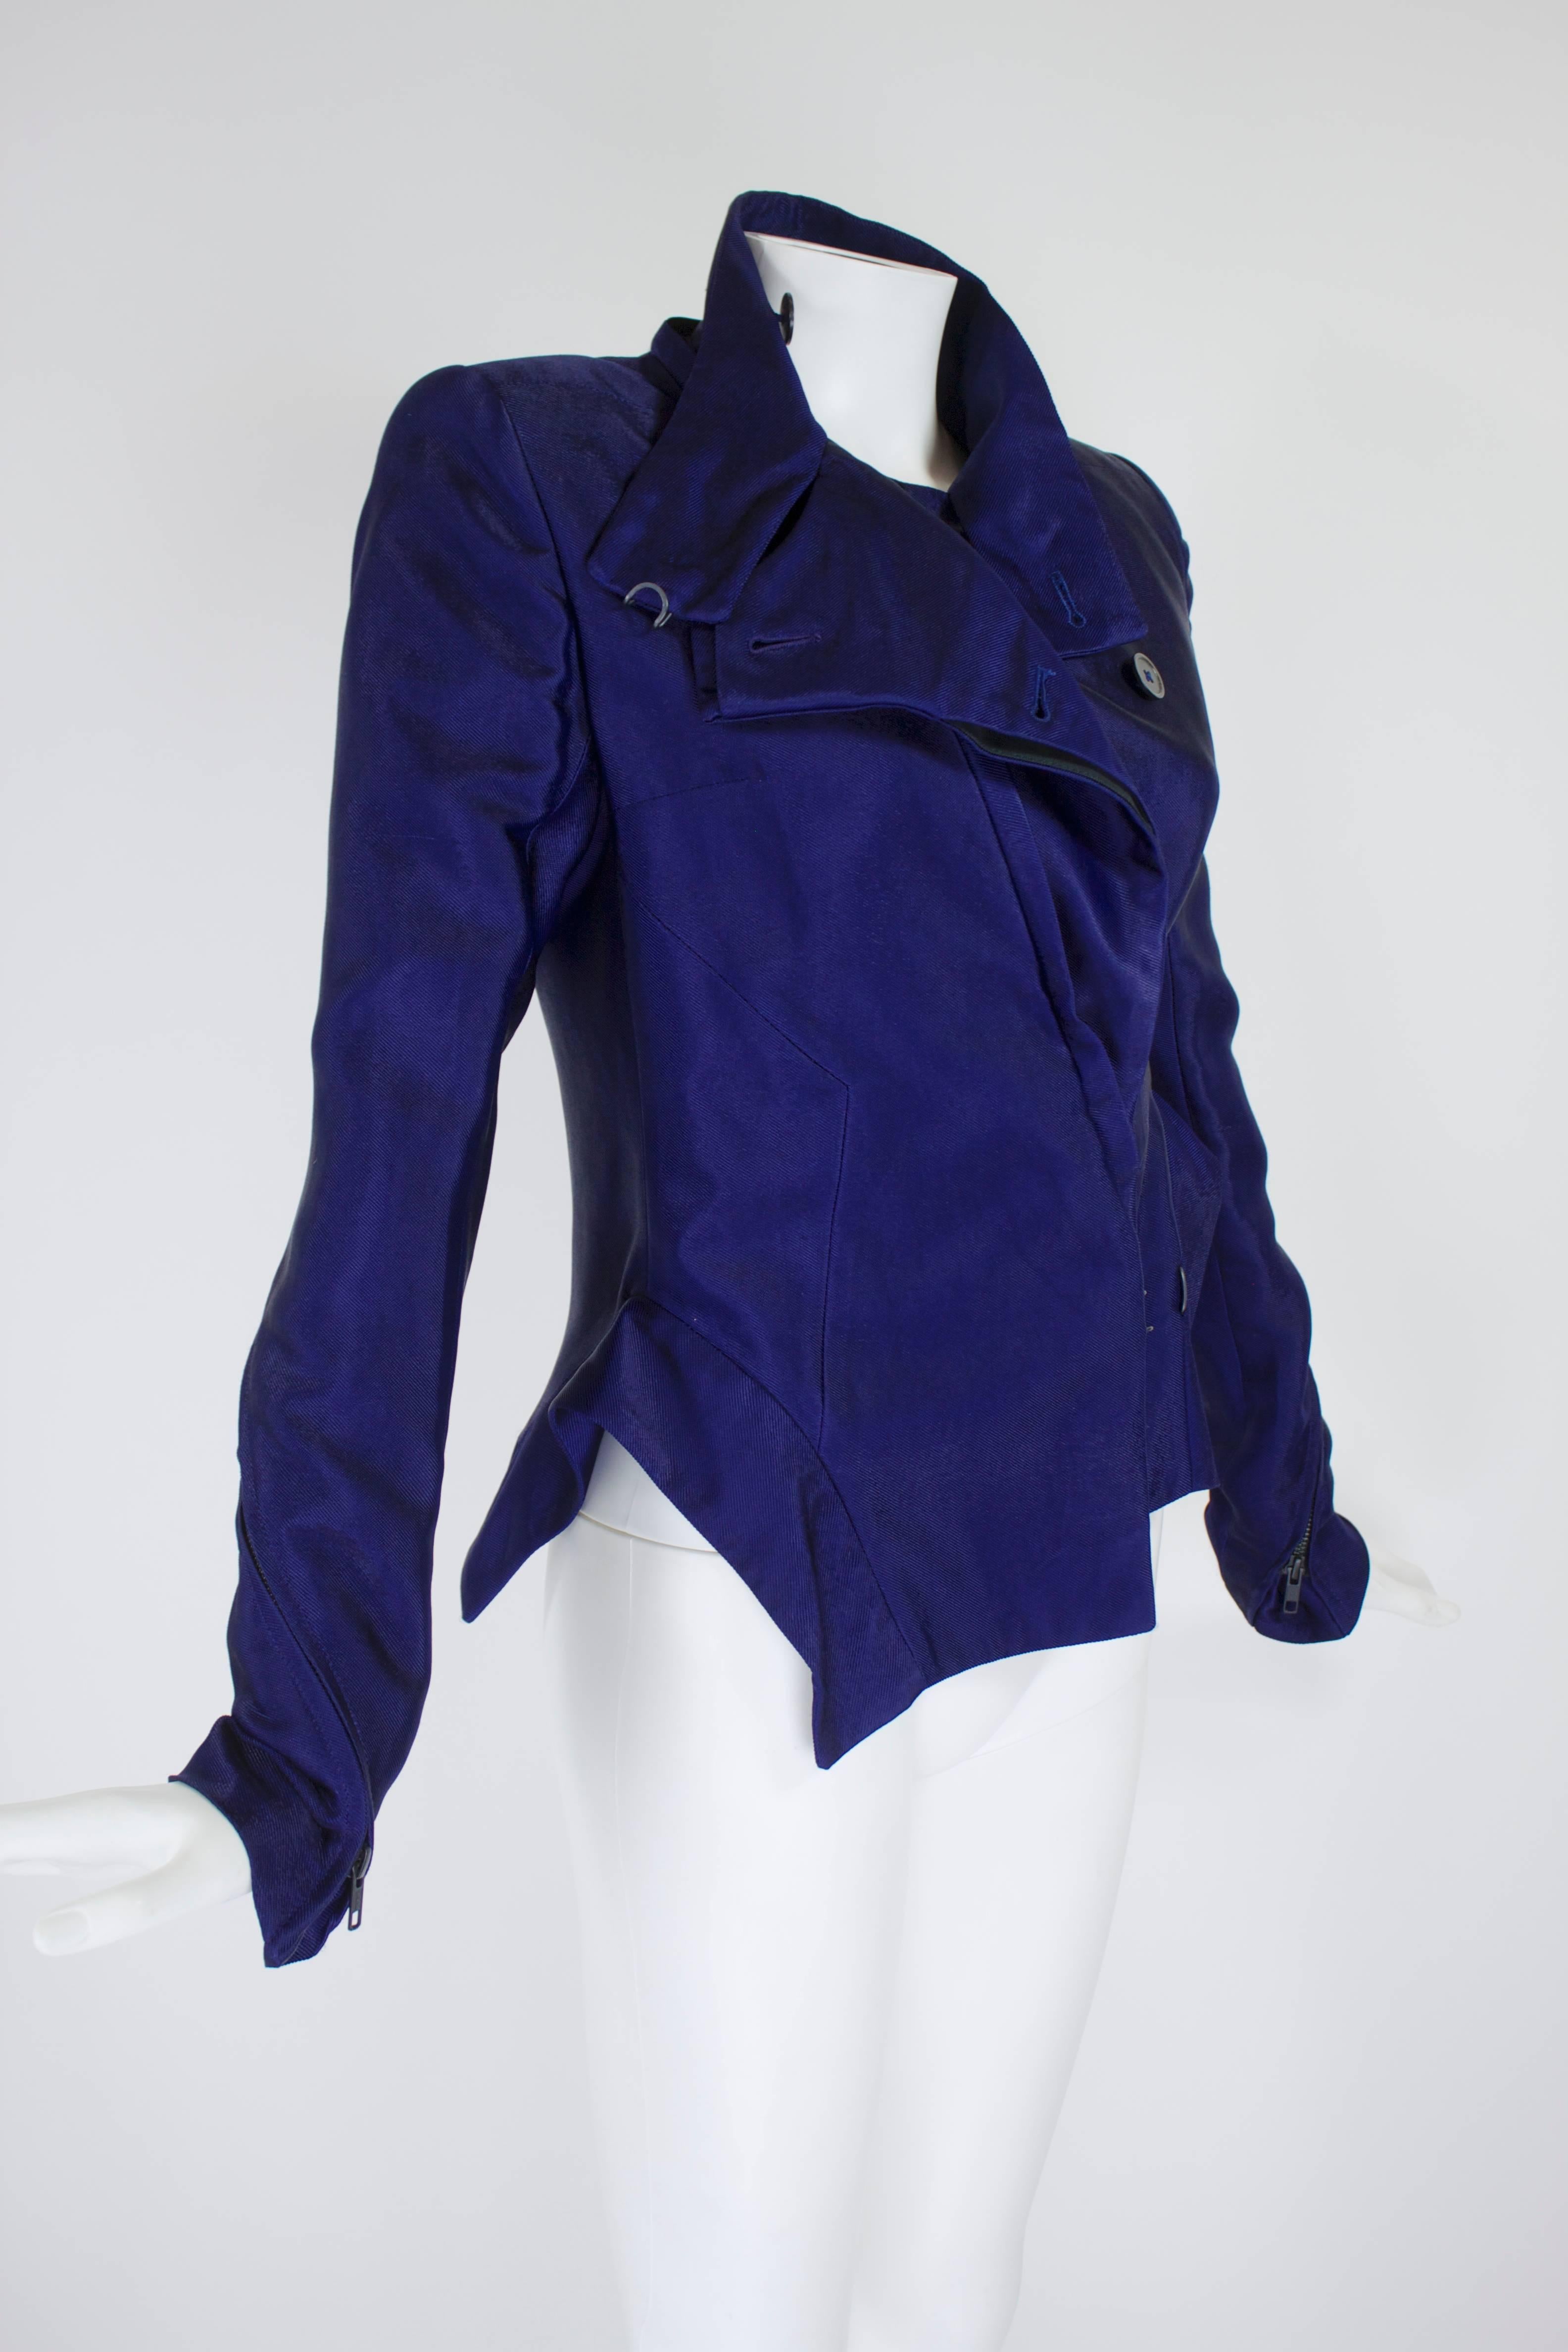 Ann Demeulemeester Asymmetrical Navy Moto Jacket with Zip Collar For Sale 1